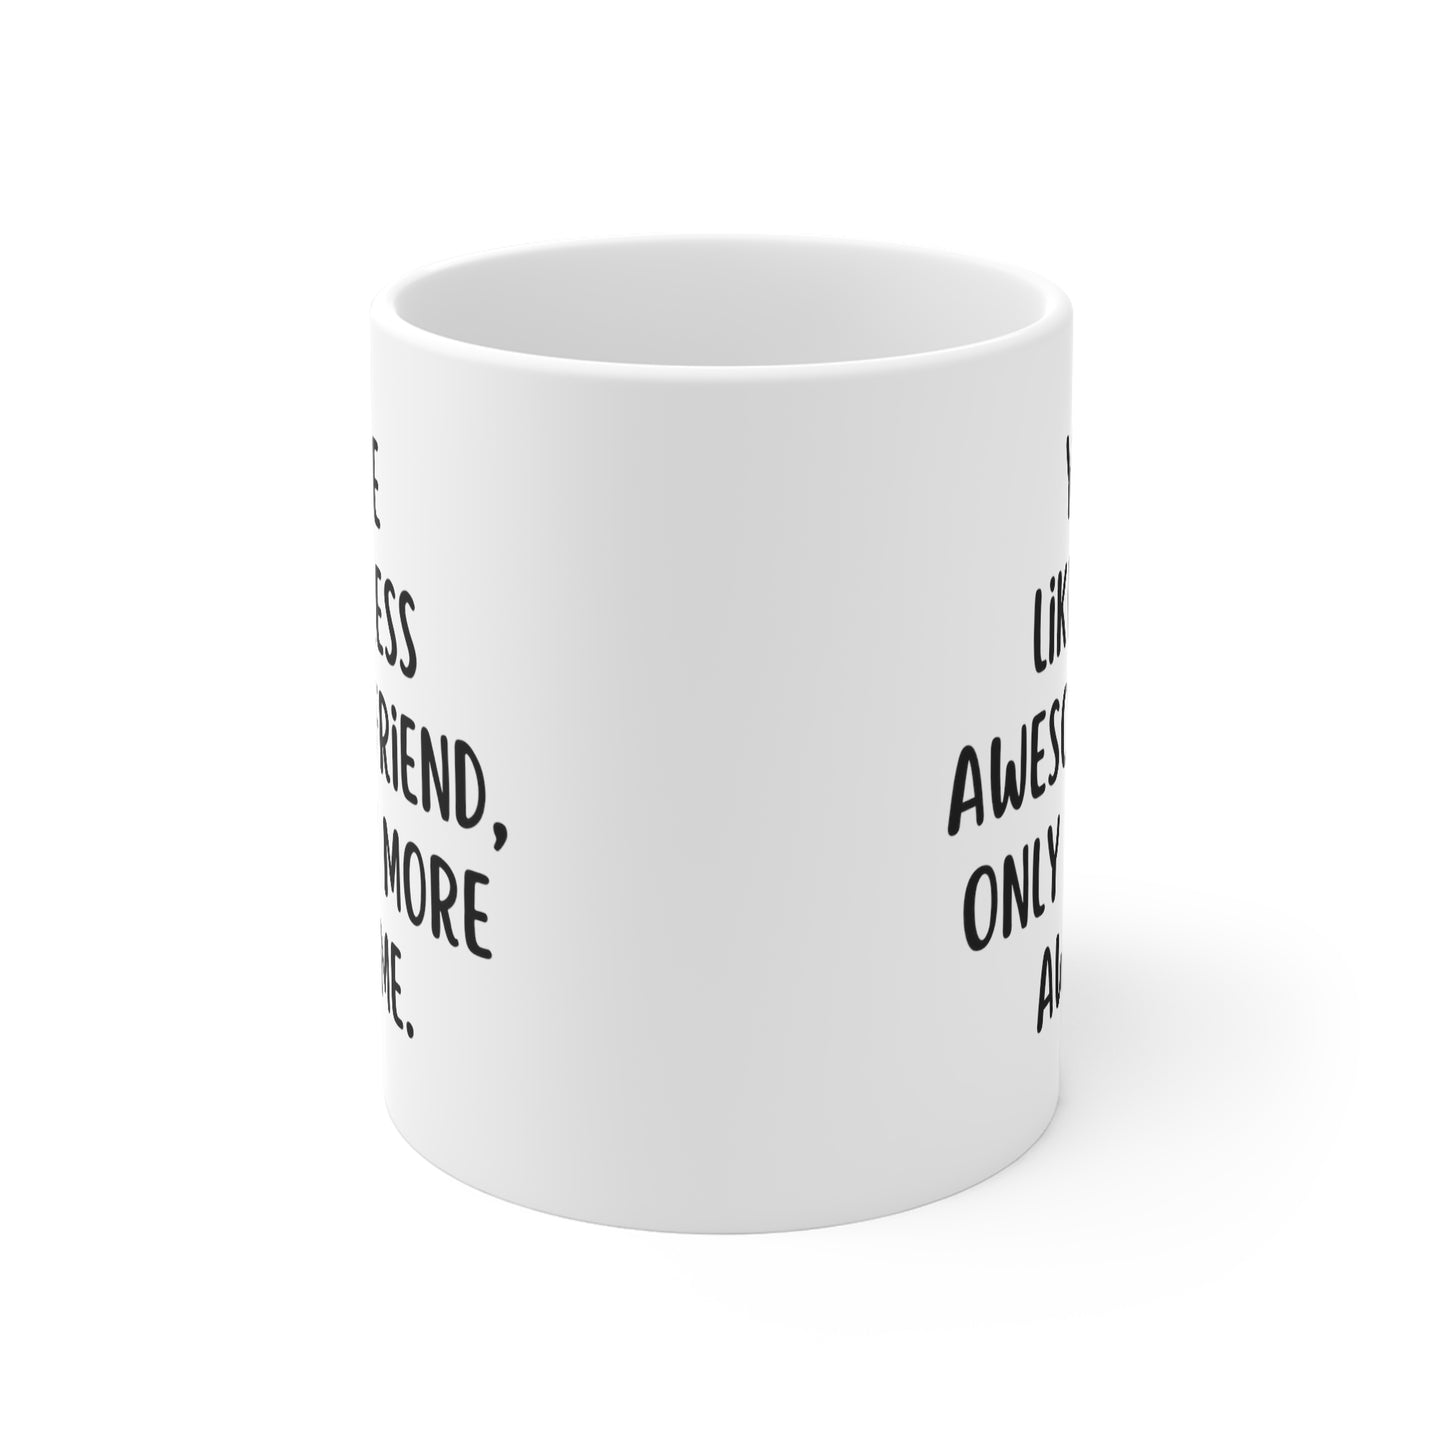 You're Like A Less Awesome Friend, Only Way More Awesome | Funny, Snarky Gift | White Ceramic Mug, Fun Block Font